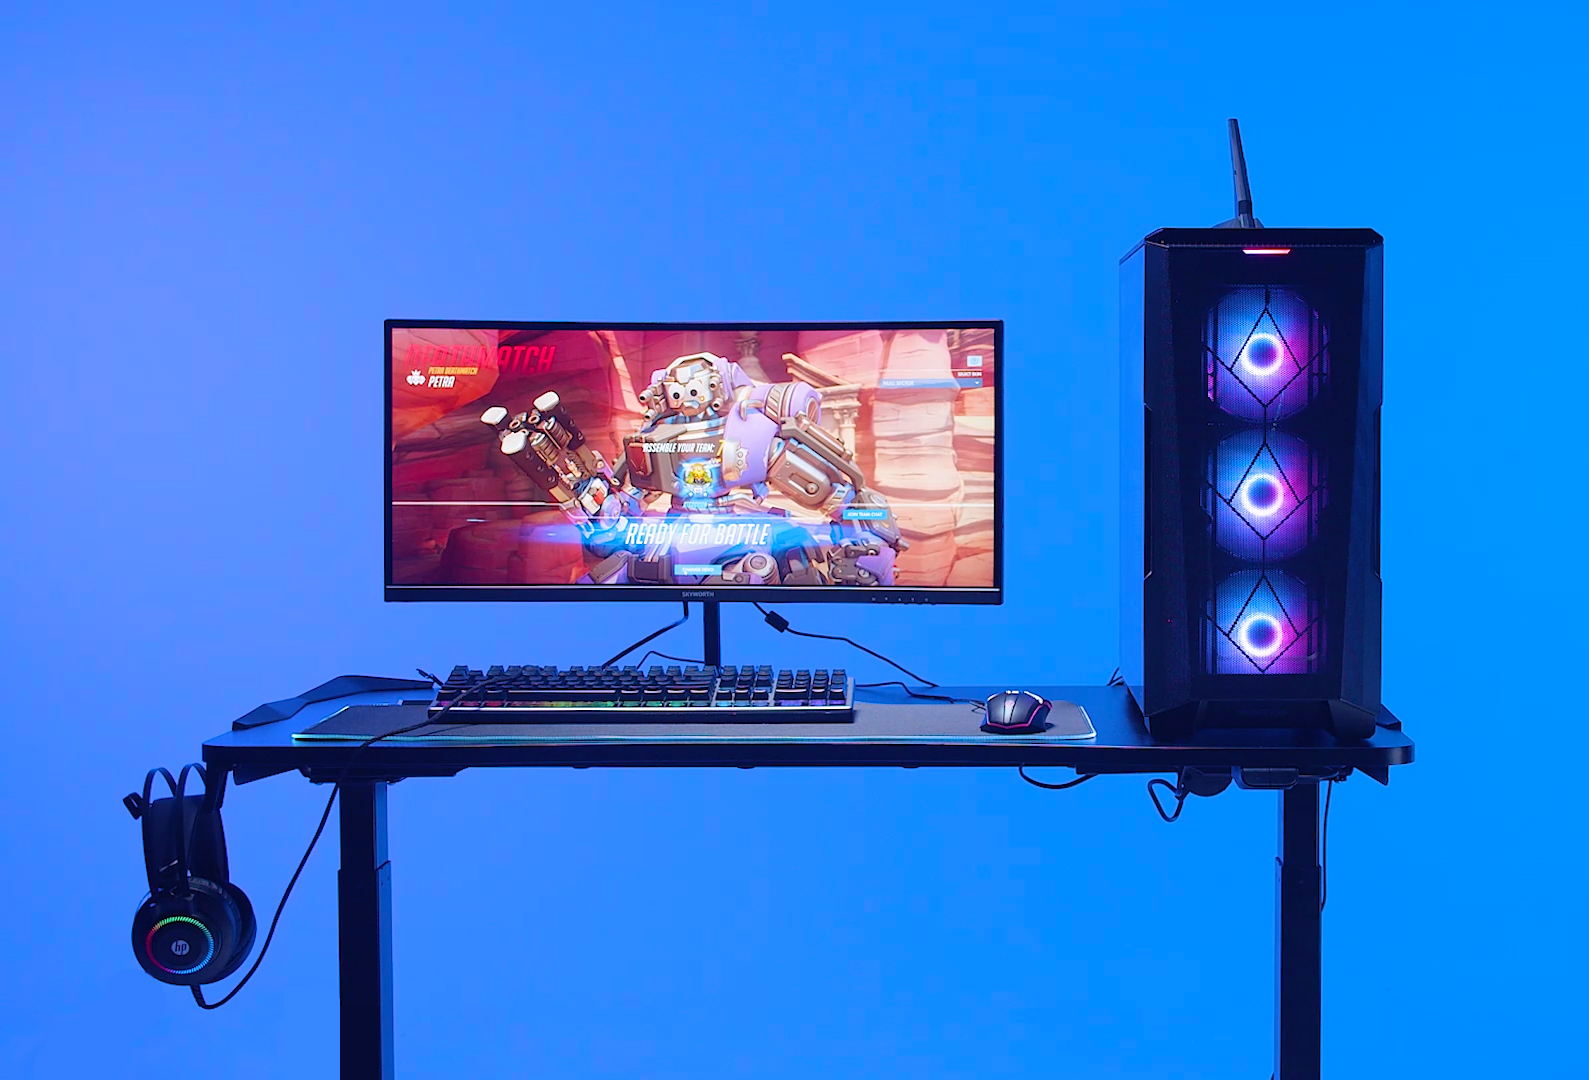 How to Choose the Best Gaming Desk for Your Gaming Setup